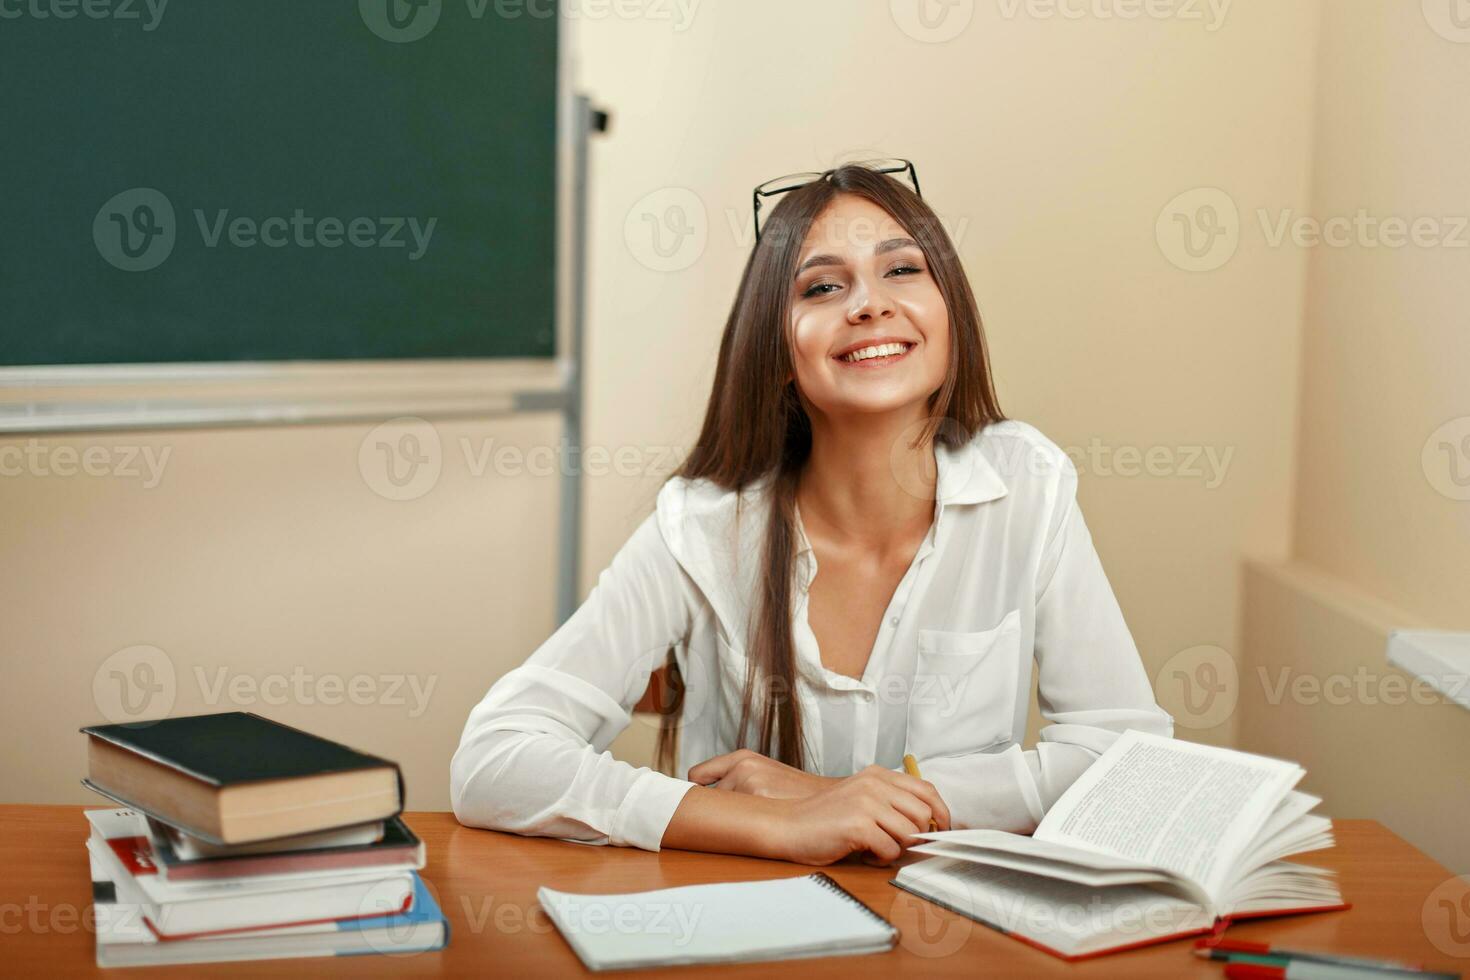 Beautiful young girl with a smile, sitting on school desk with books. Back to school photo